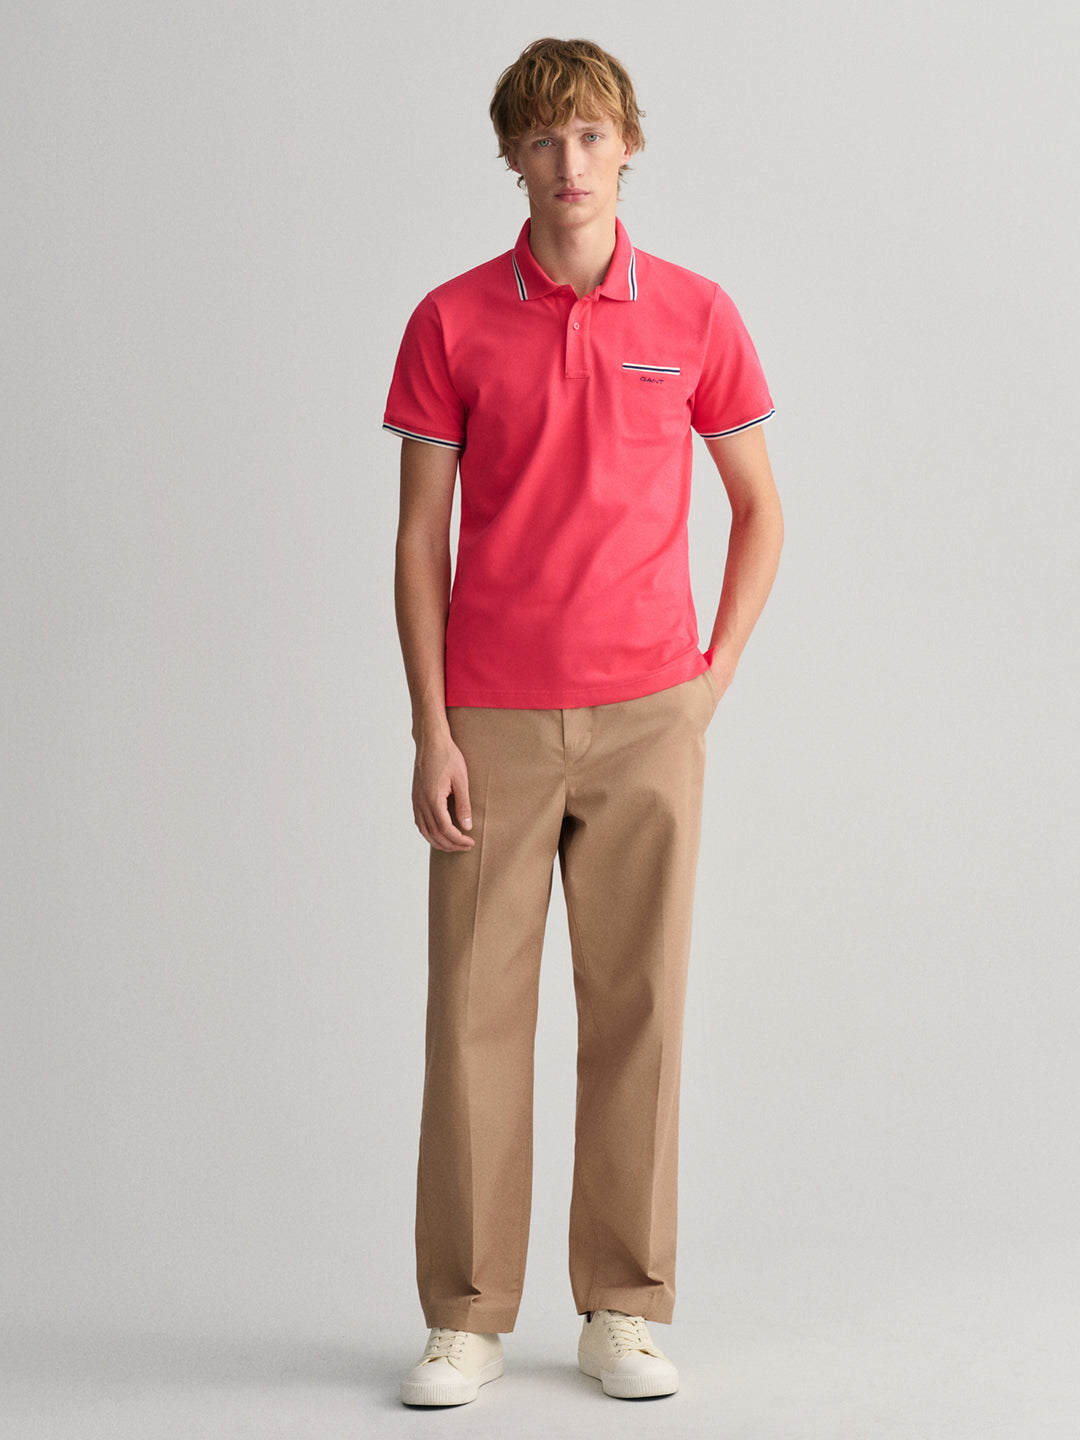 Gant Pink 3Color Tipping Regular Fit Pique Polo T-Shirt